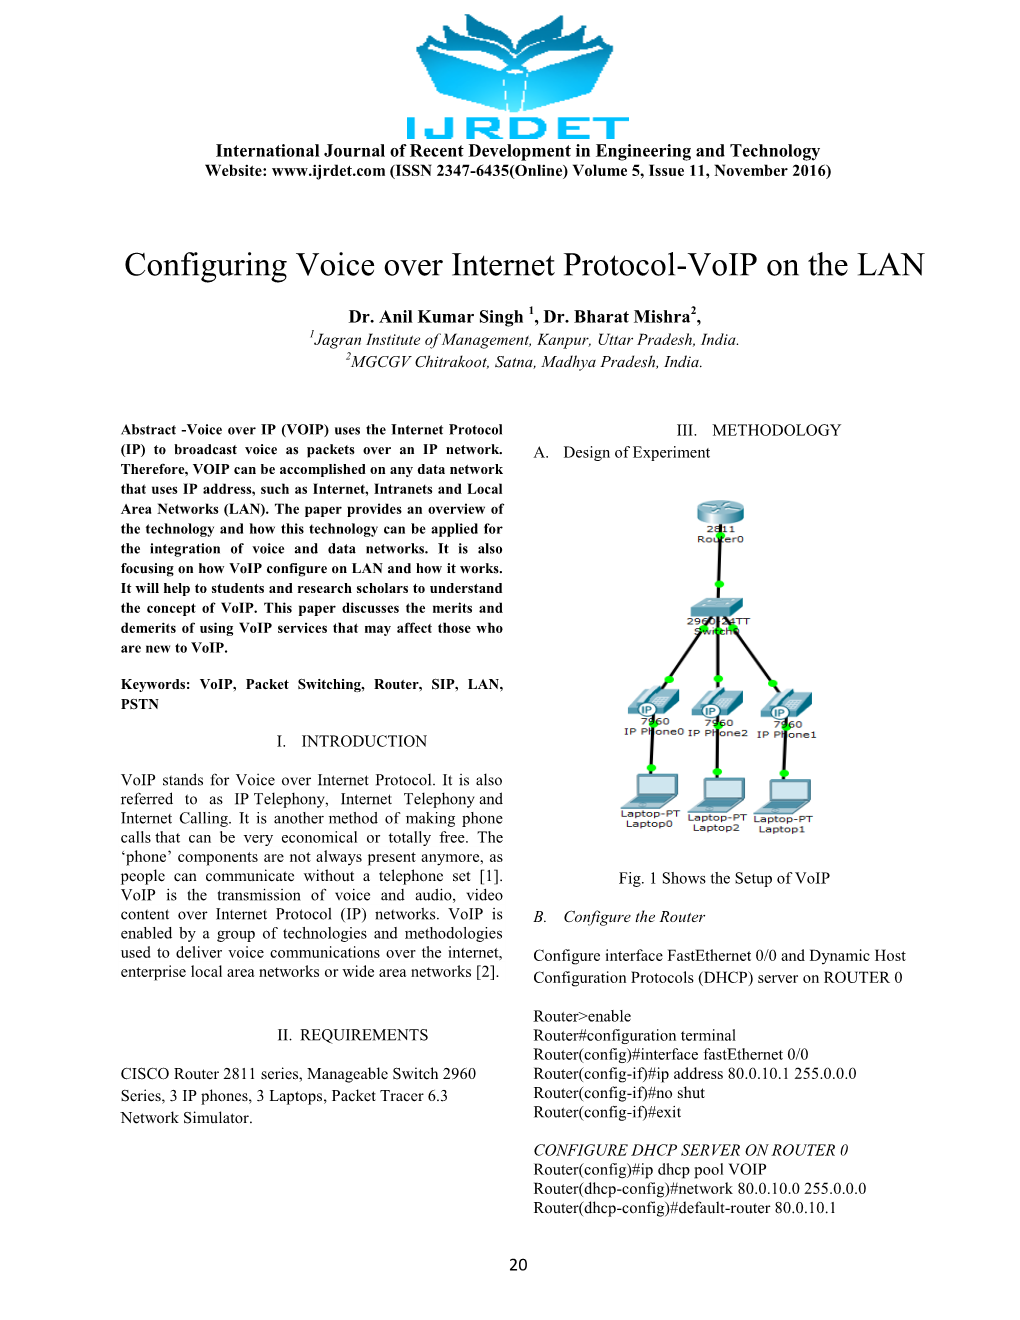 Configuring Voice Over Internet Protocol-Voip on the LAN